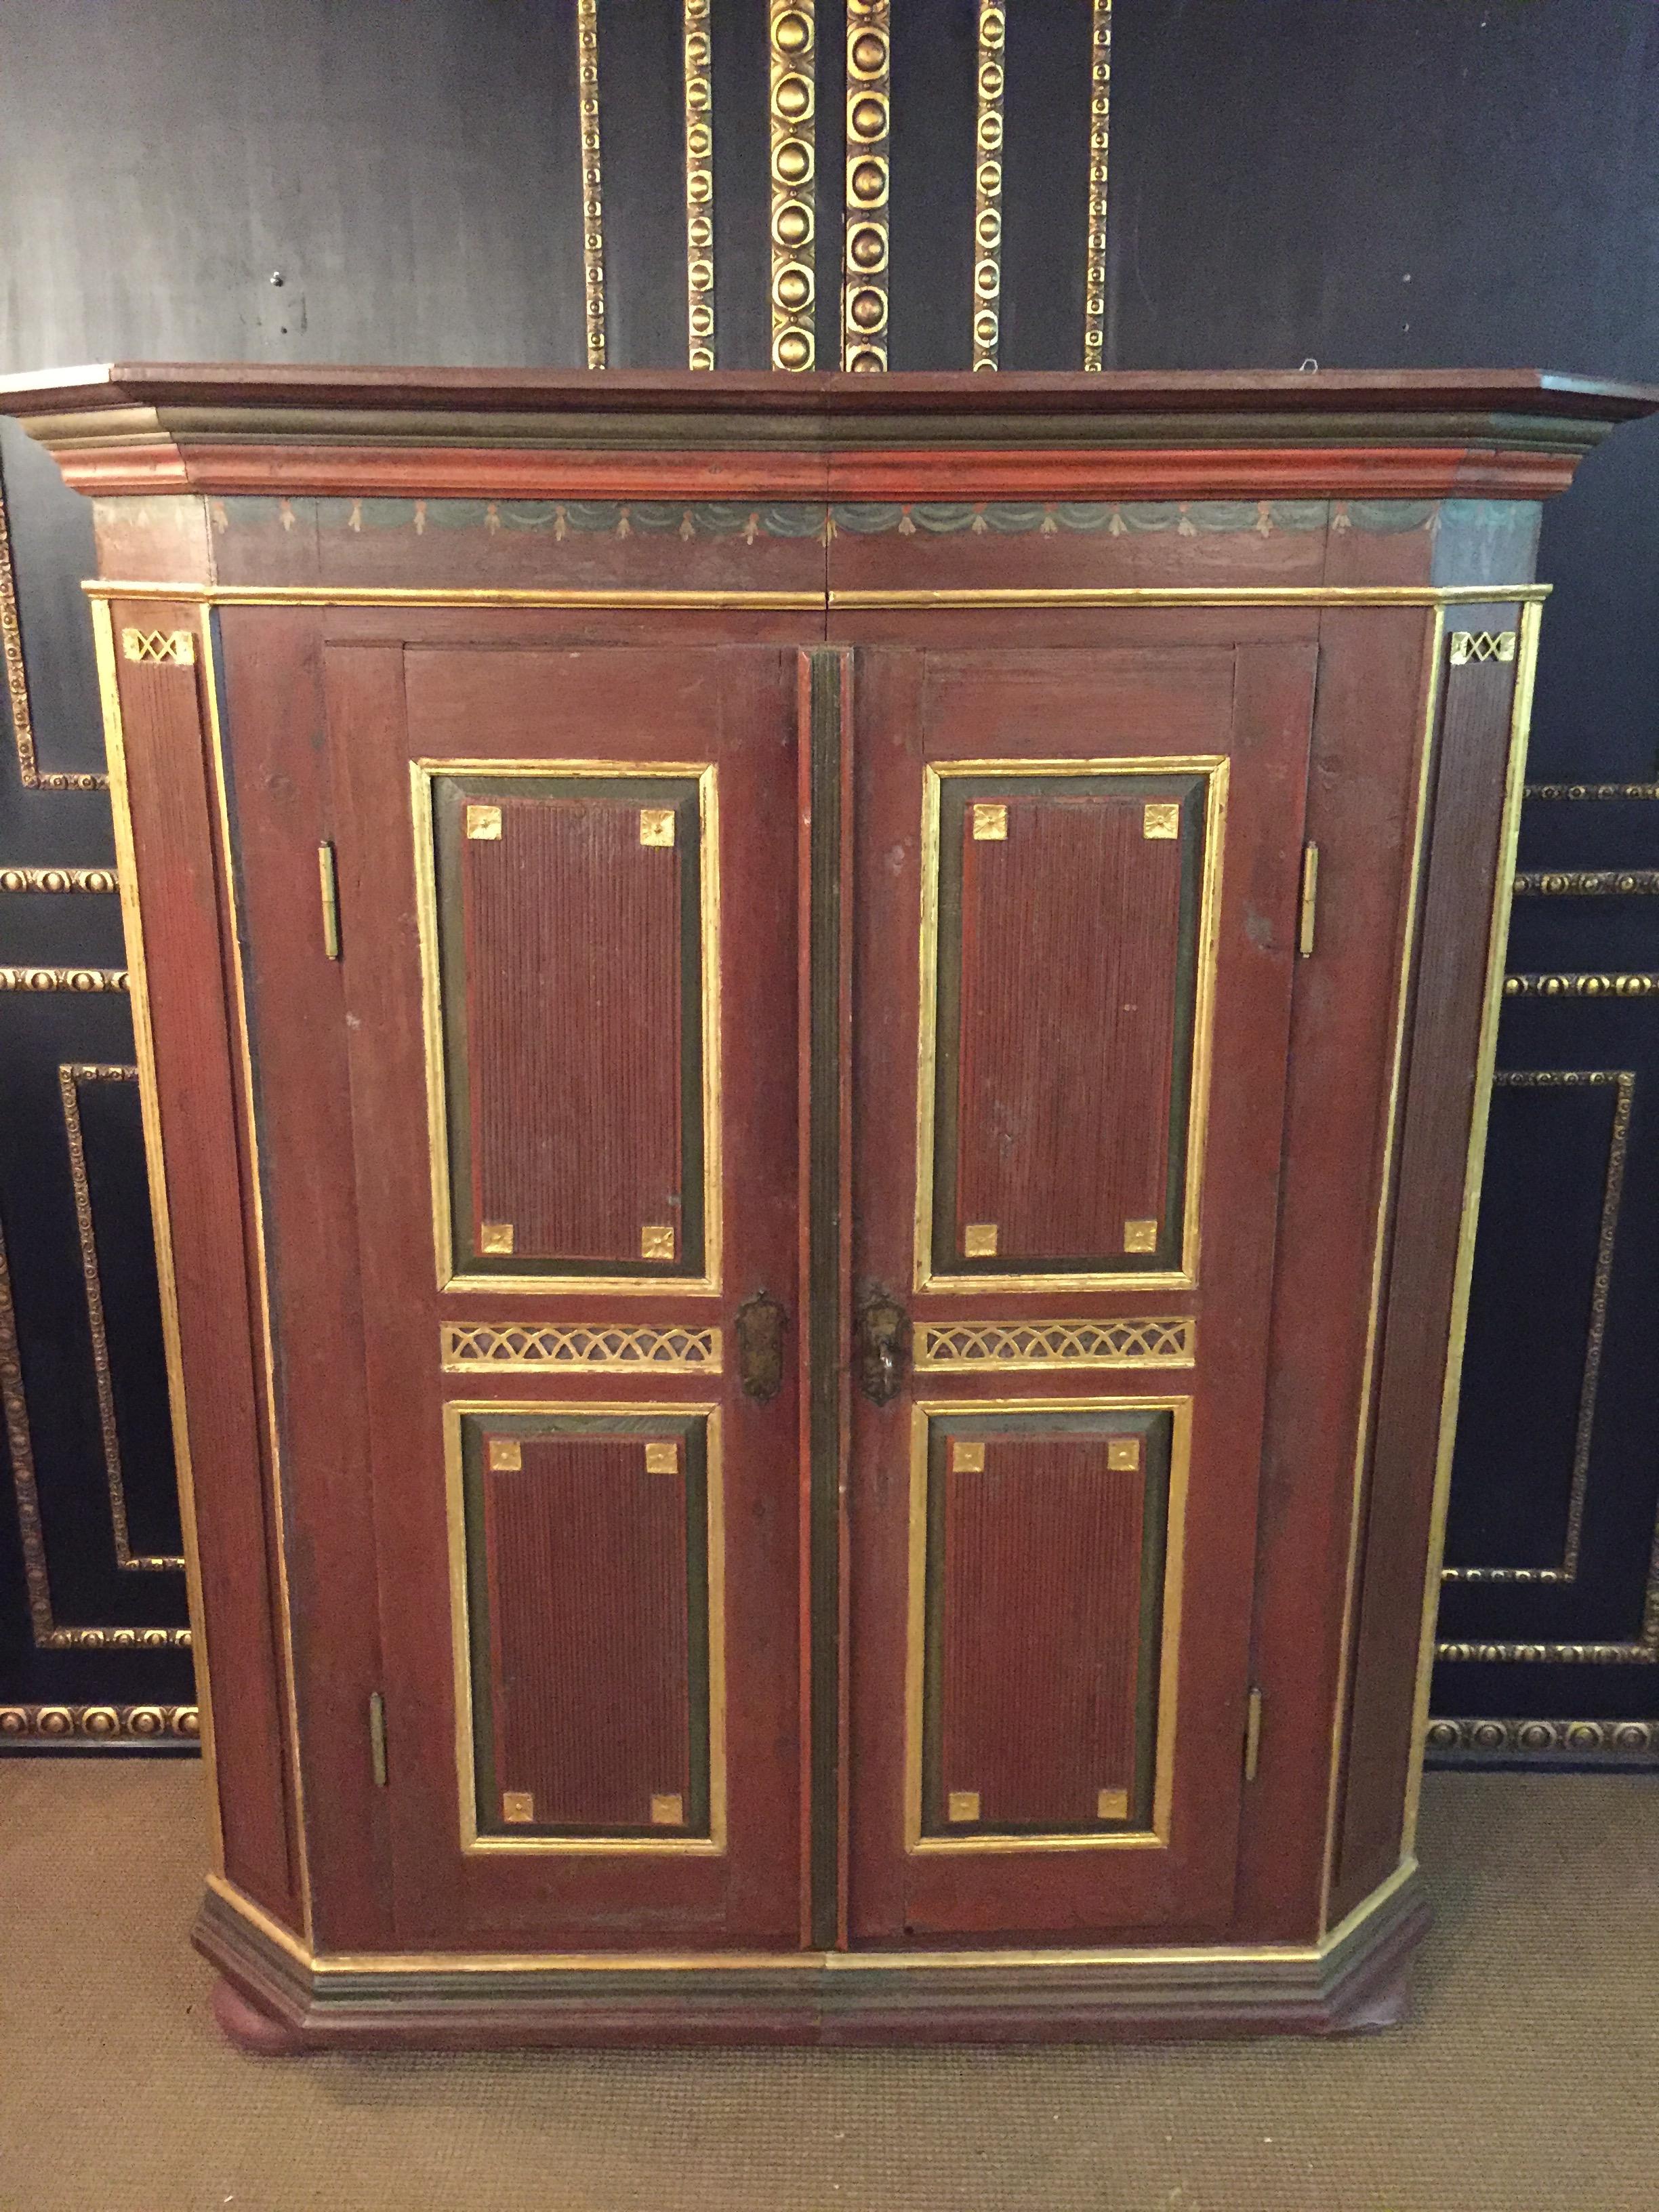 Extremely impressive noble building cabinet. Germany circa 1790 Beautiful historical gold leaf. Old snap closure with original key and wrought iron fittings.
The cabinet can be divided in half for transportation.